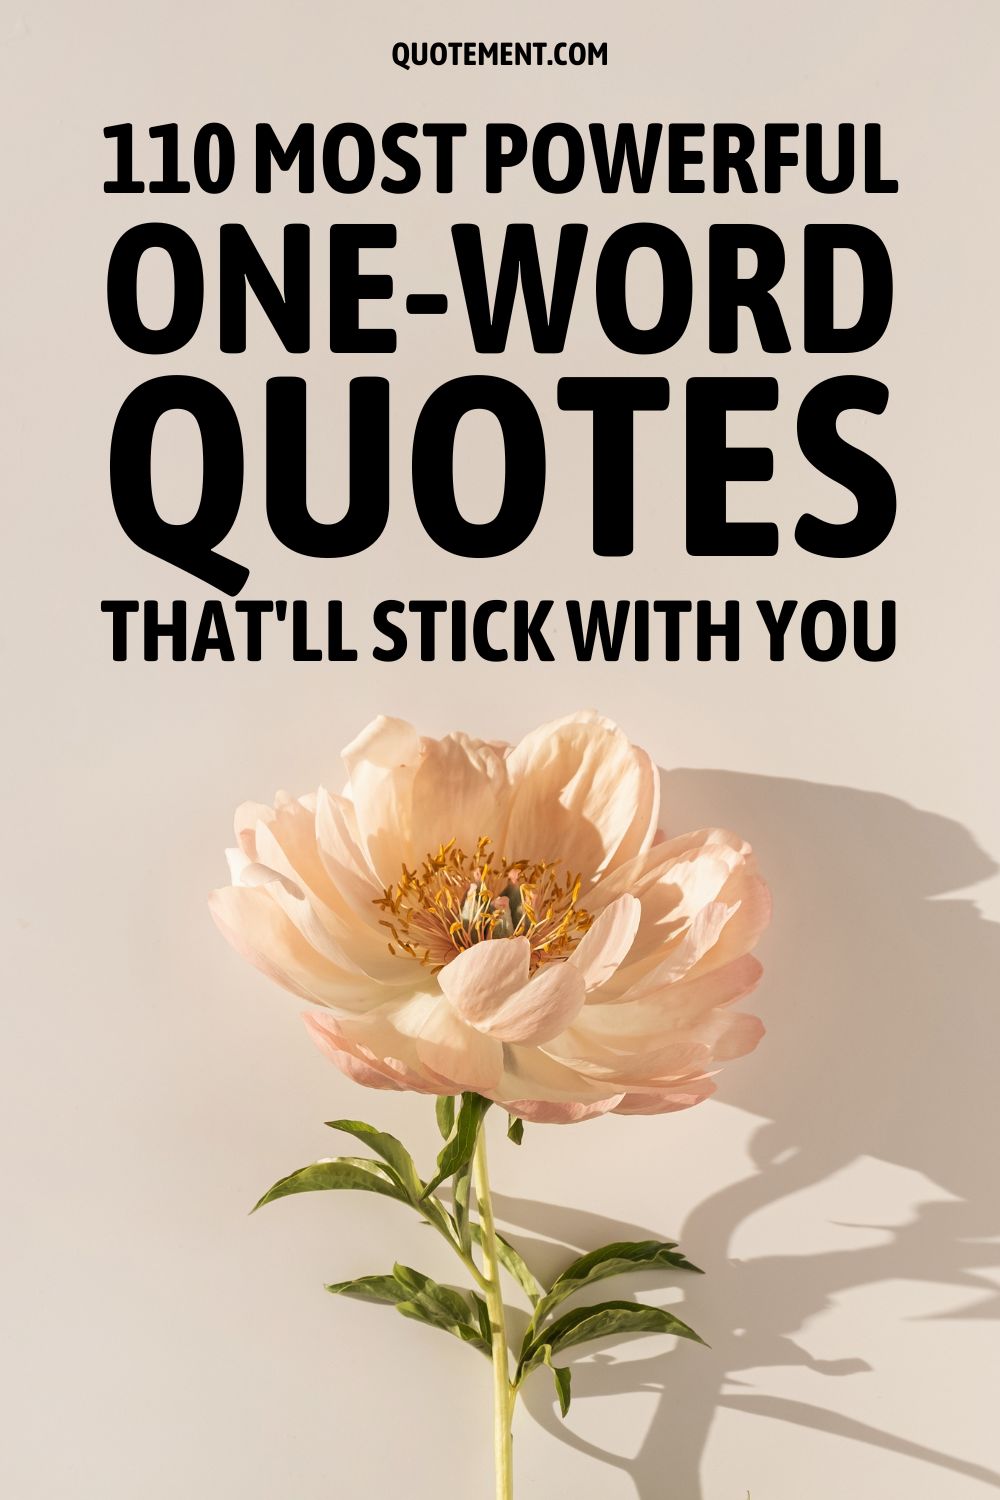 110 Most Powerful One-Word Quotes That'll Stick With You